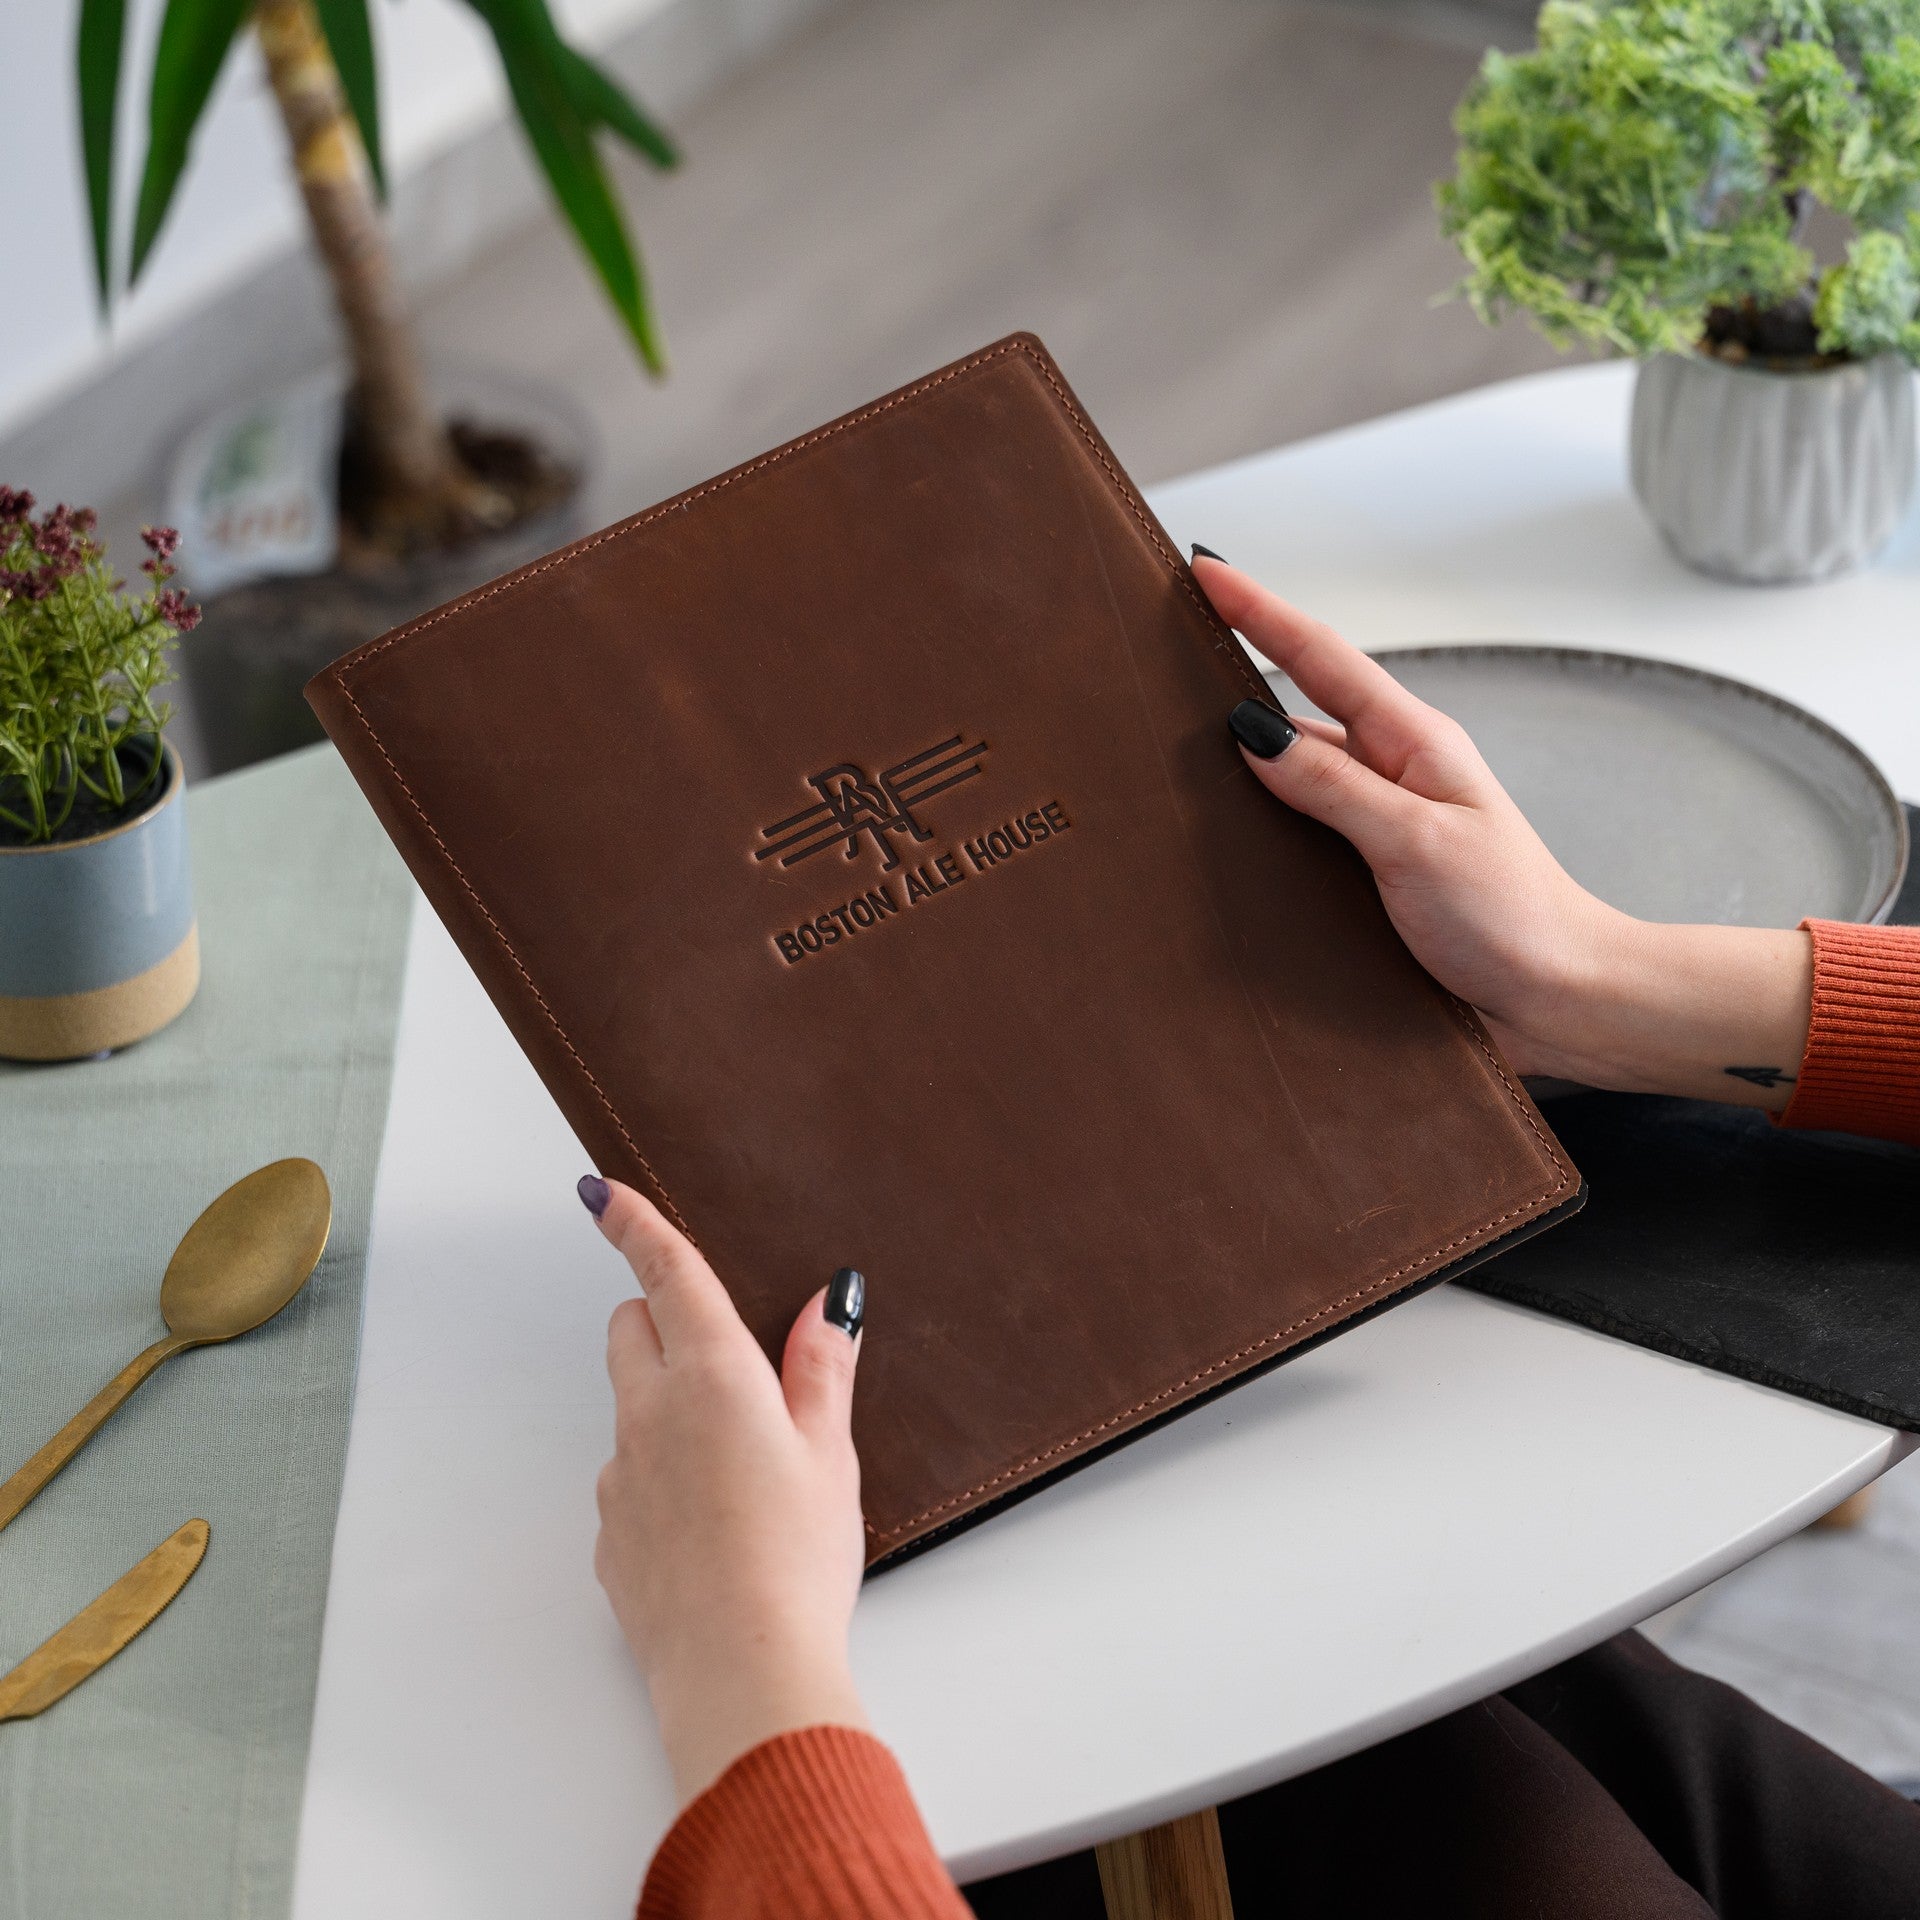 Enhance your dining experience with our customized menu folder, tailored to your specifications.